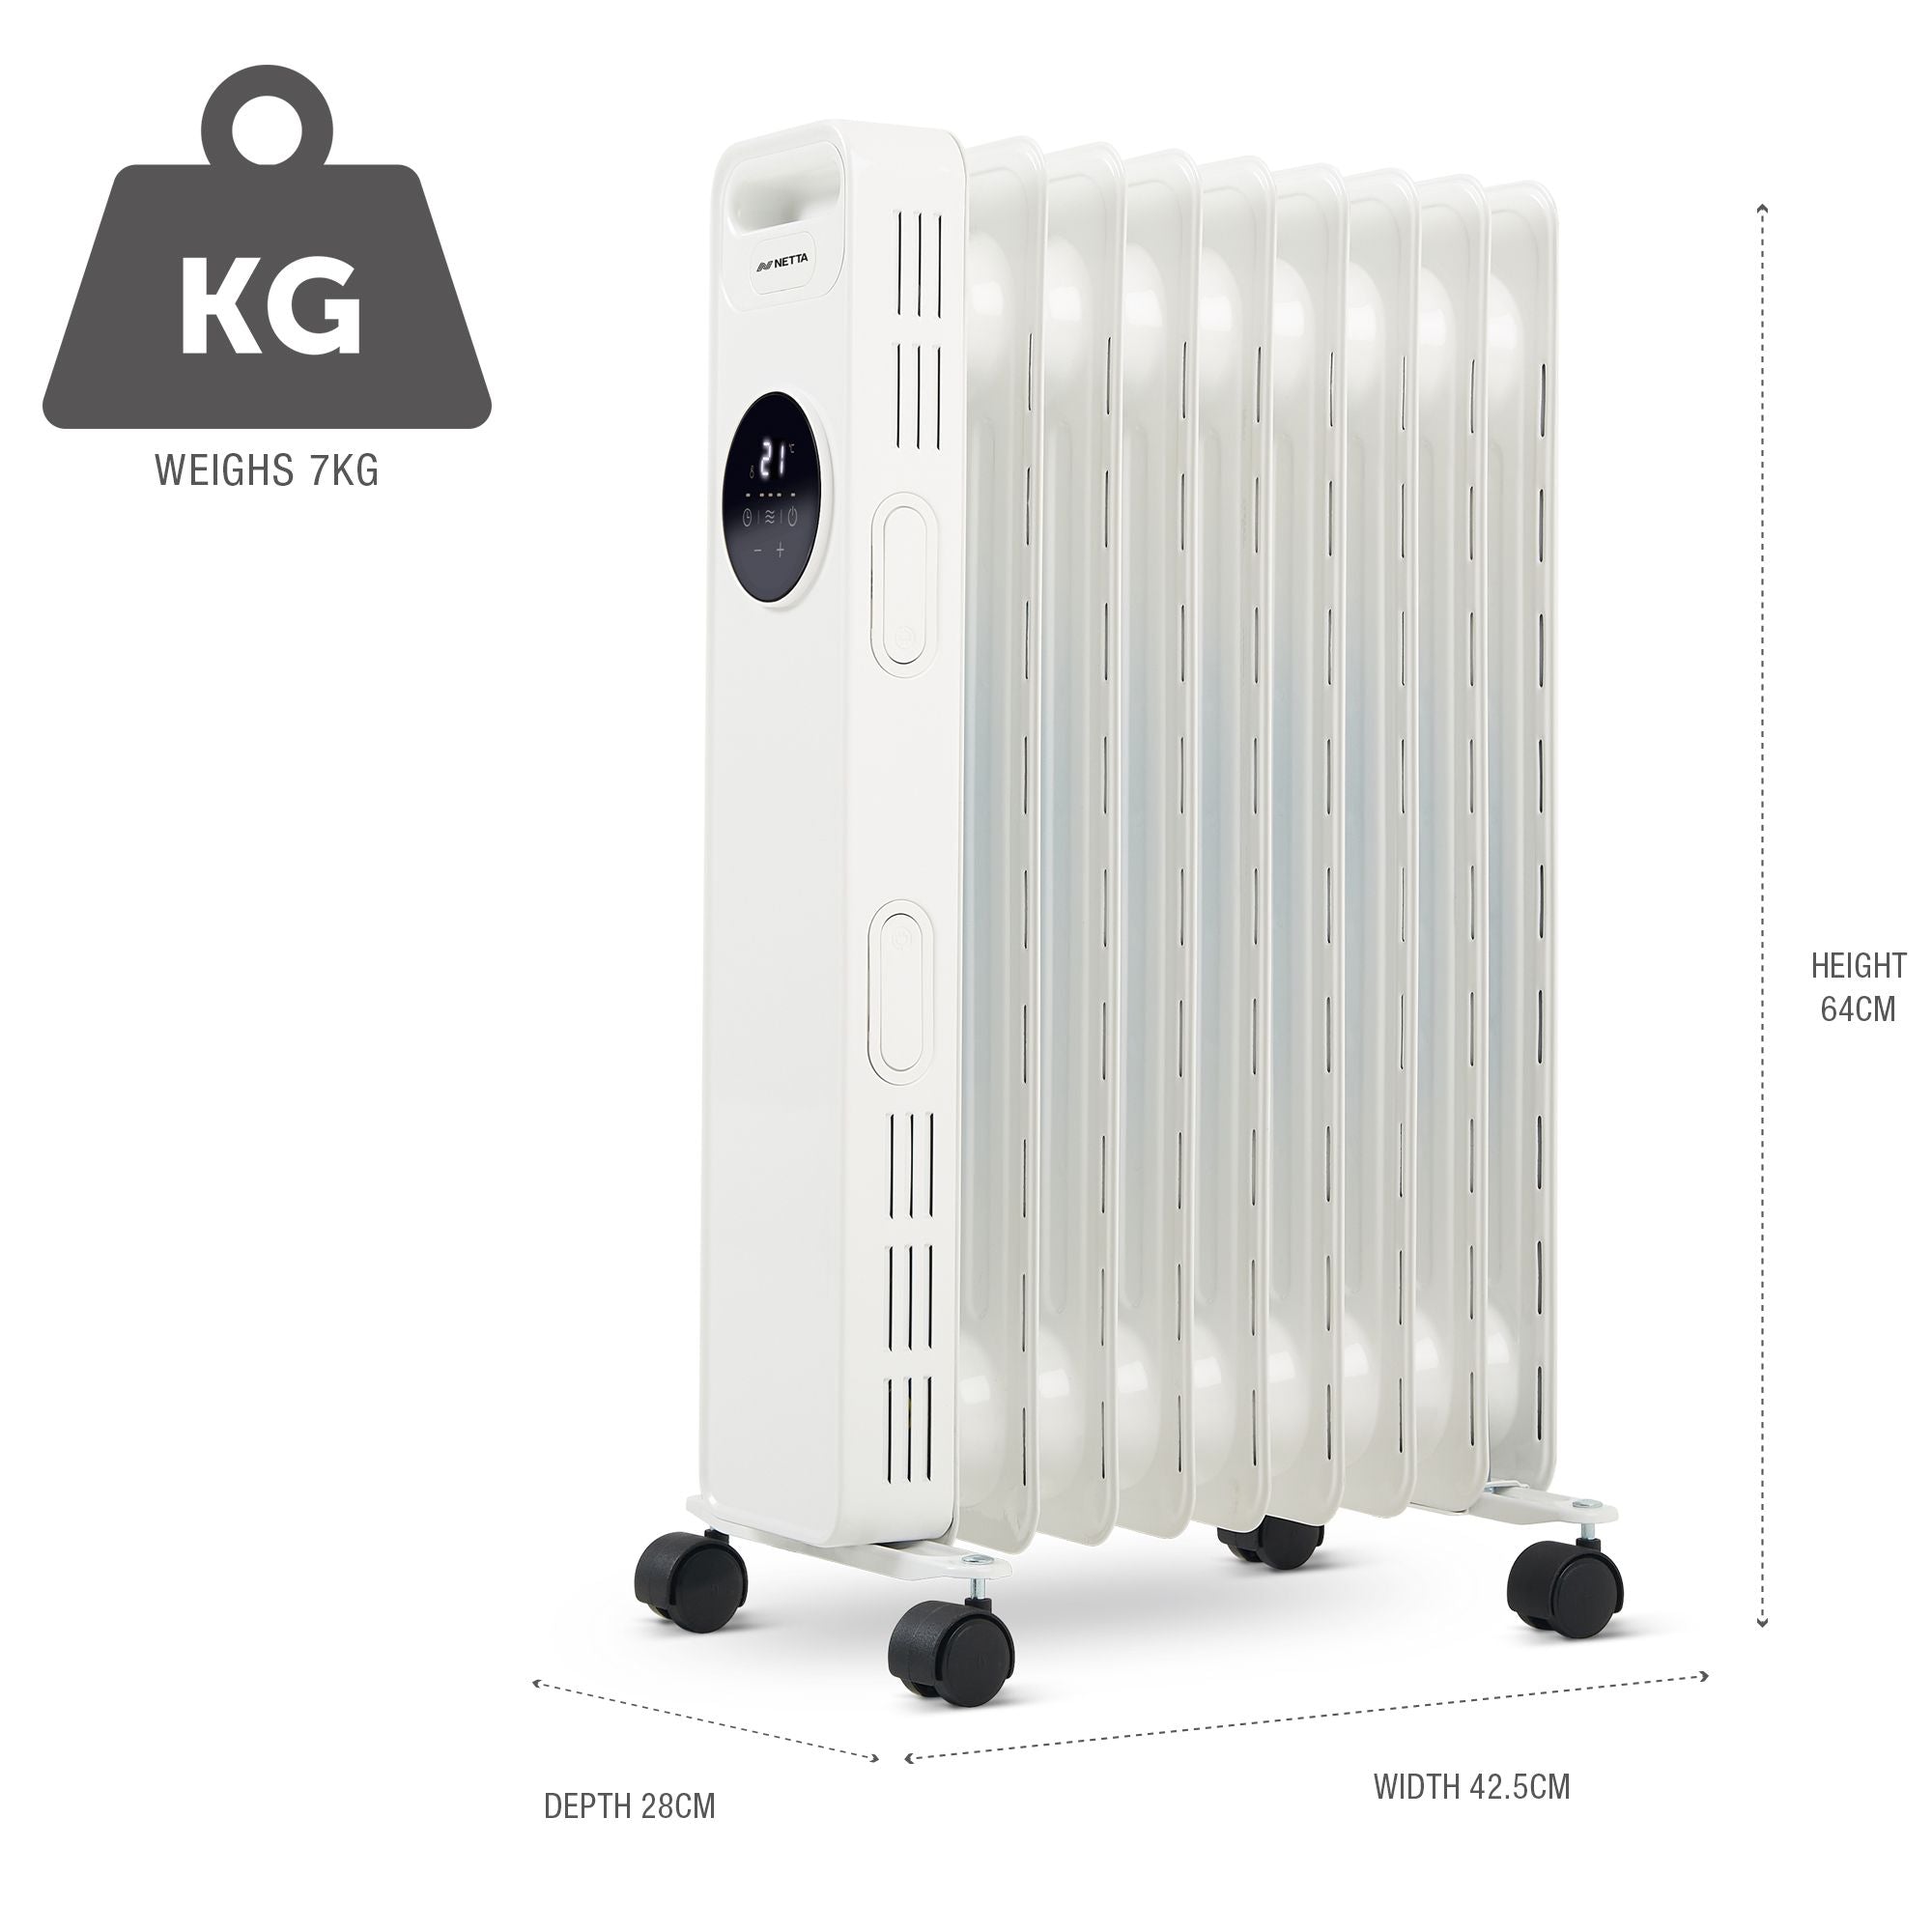 NETTA 2000W 9 Fin Oil Filled Radiator with Timer & Remote Control - White